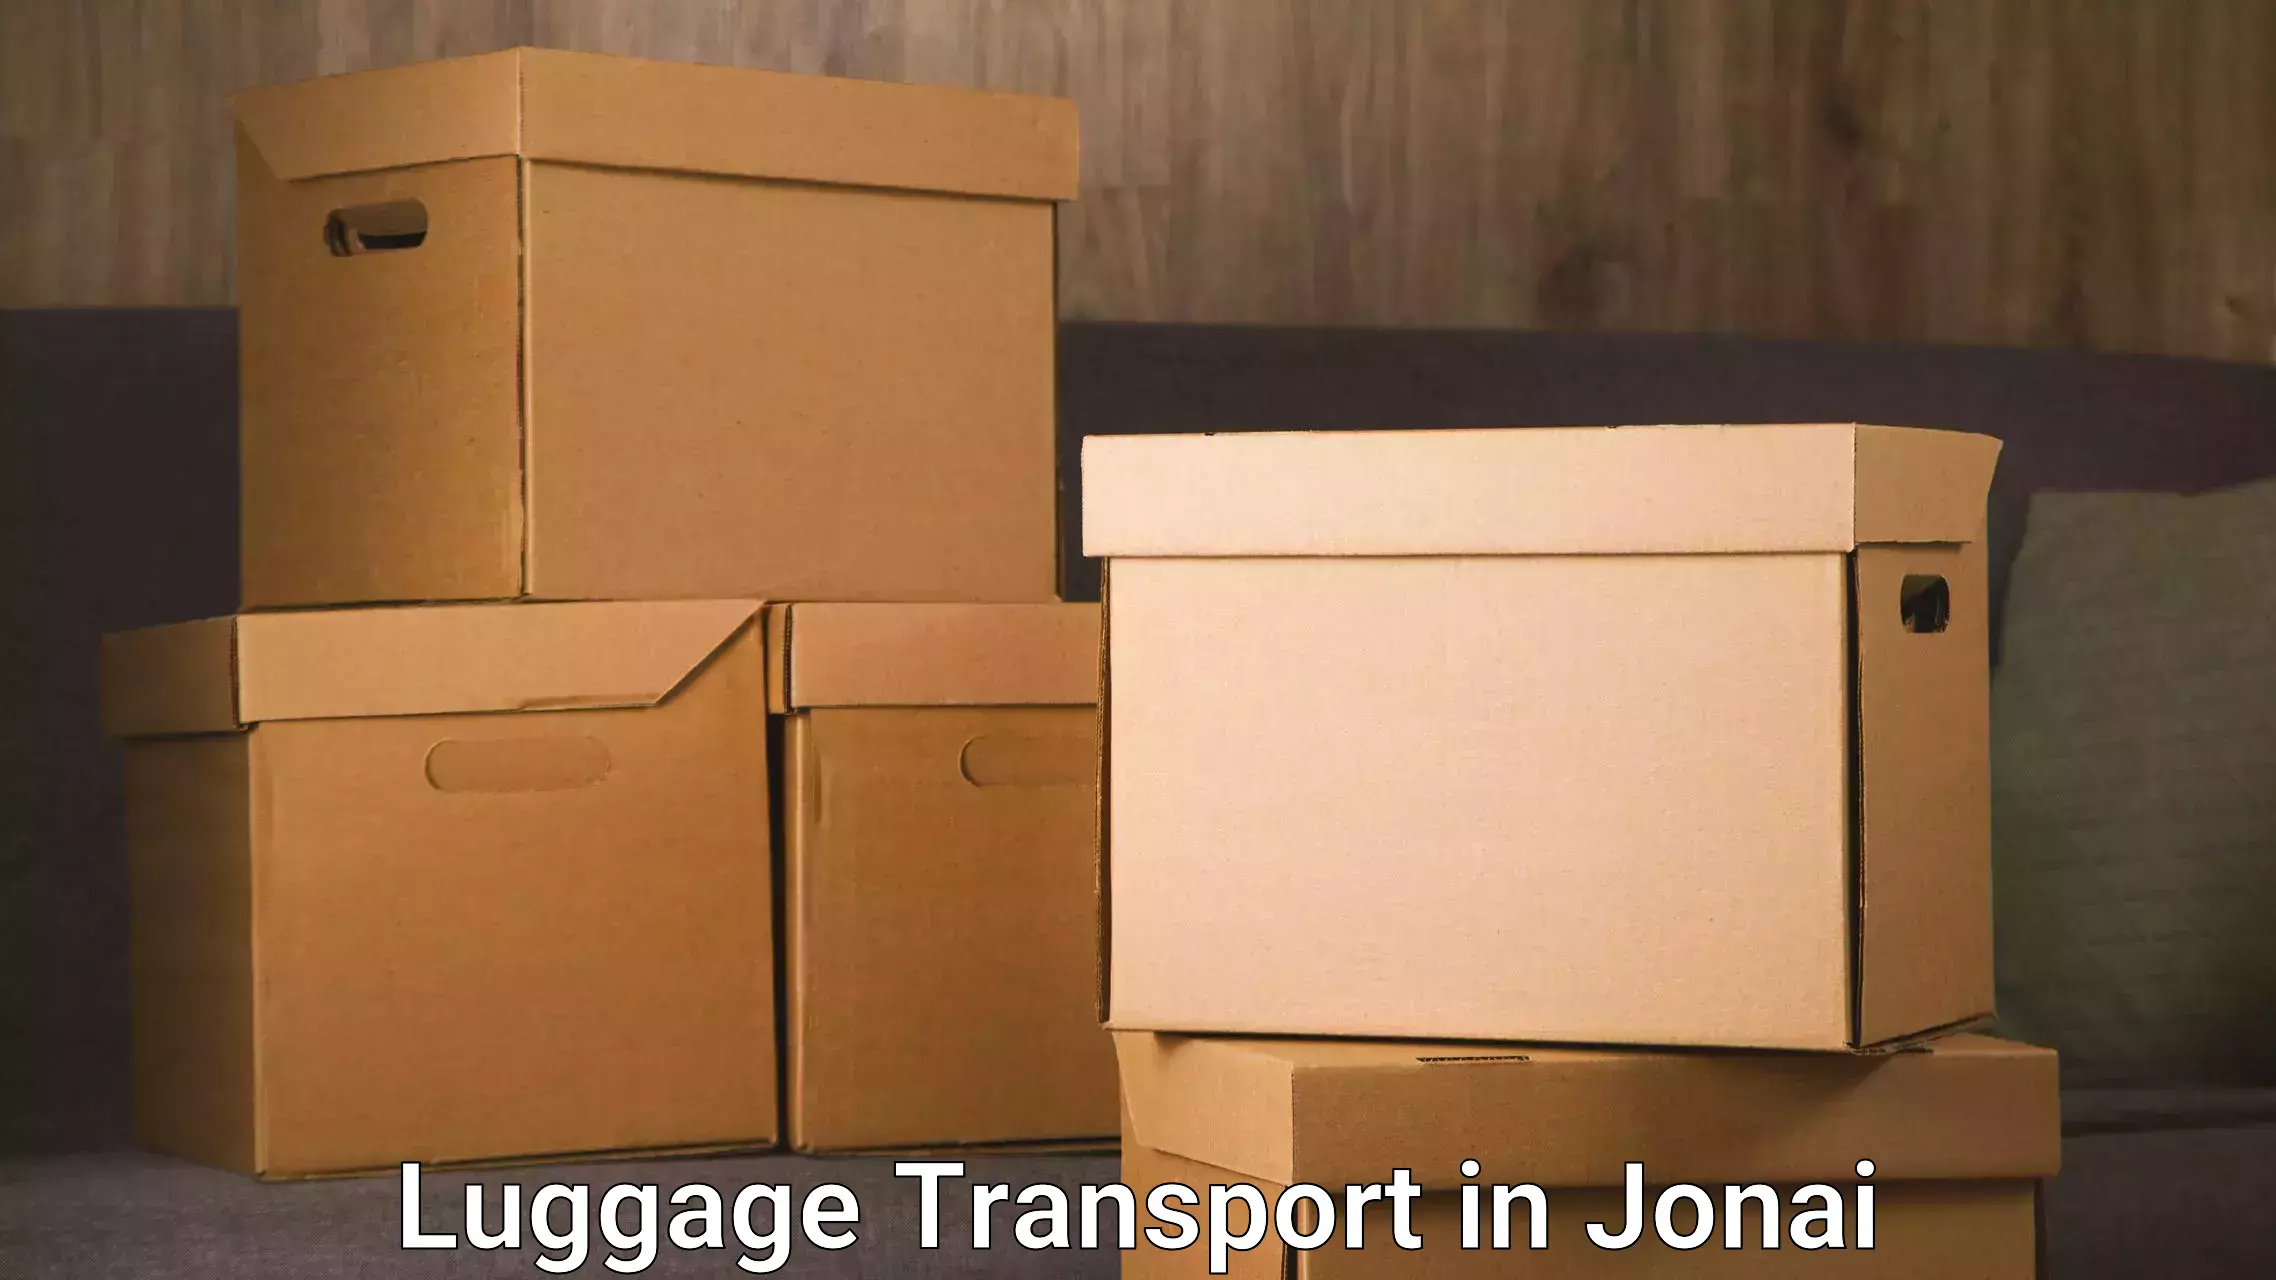 Express luggage delivery in Jonai